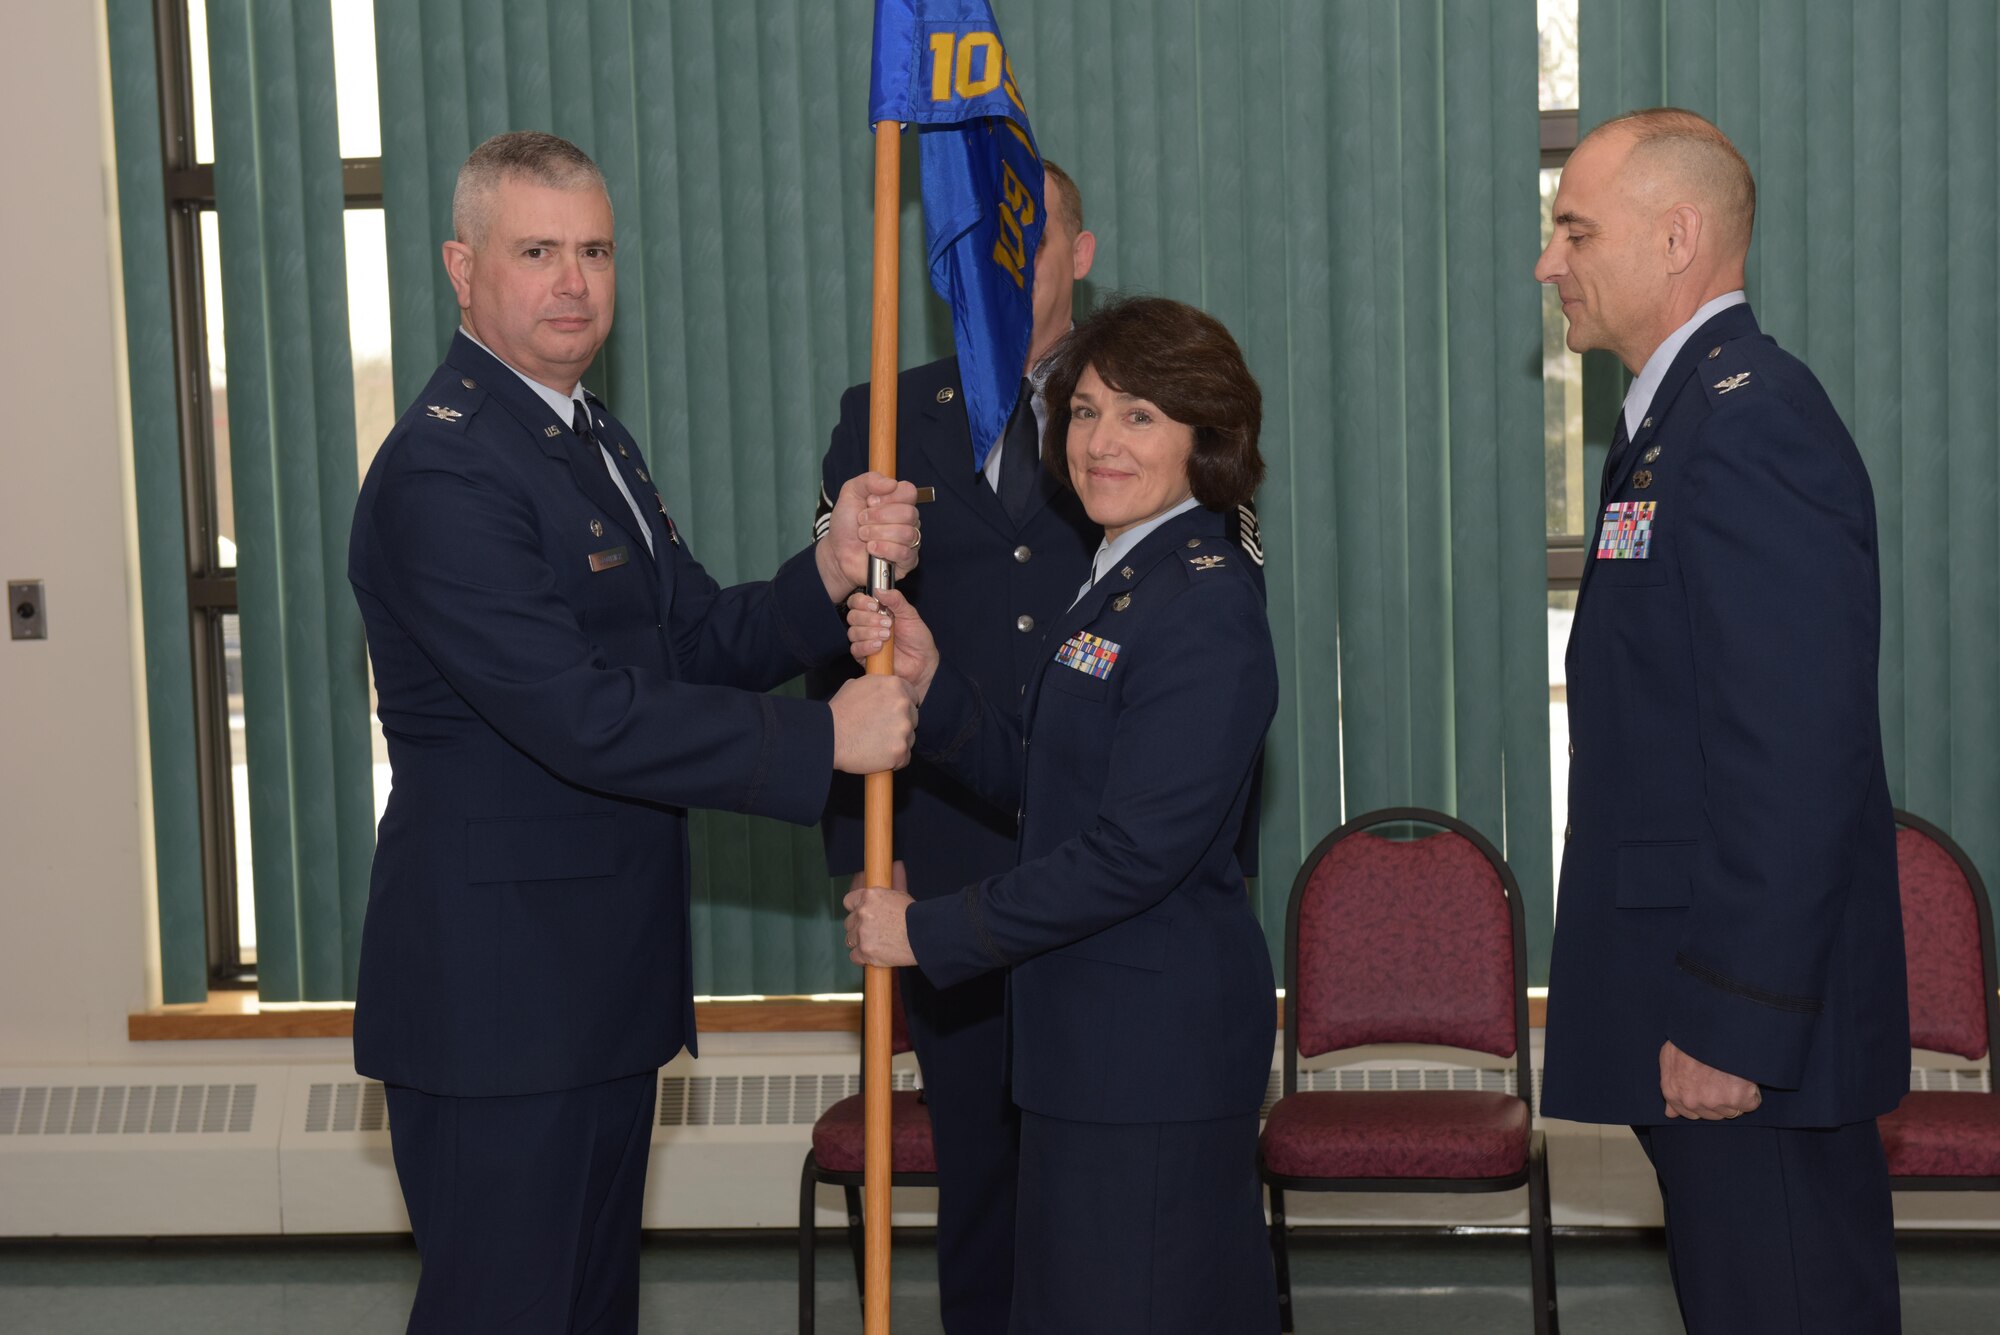 Col. Jeffrey Hedges (right), outgoing 109th Mission Support Group commander, looks on during  the MSG change of command ceremony. 109th Airlift Wing commander Col. Shawn Clotheir hands the guidon to the incoming MSG commander Col. Maureen Murphy during this time honored military tradition signifying the transfer of responsiblity. The ceremony took place at Stratton Air National Guard Base, New York, on Feb. 4, 2017. (U.S. Air National Guard photo by Staff Sgt. Ben German/Released)